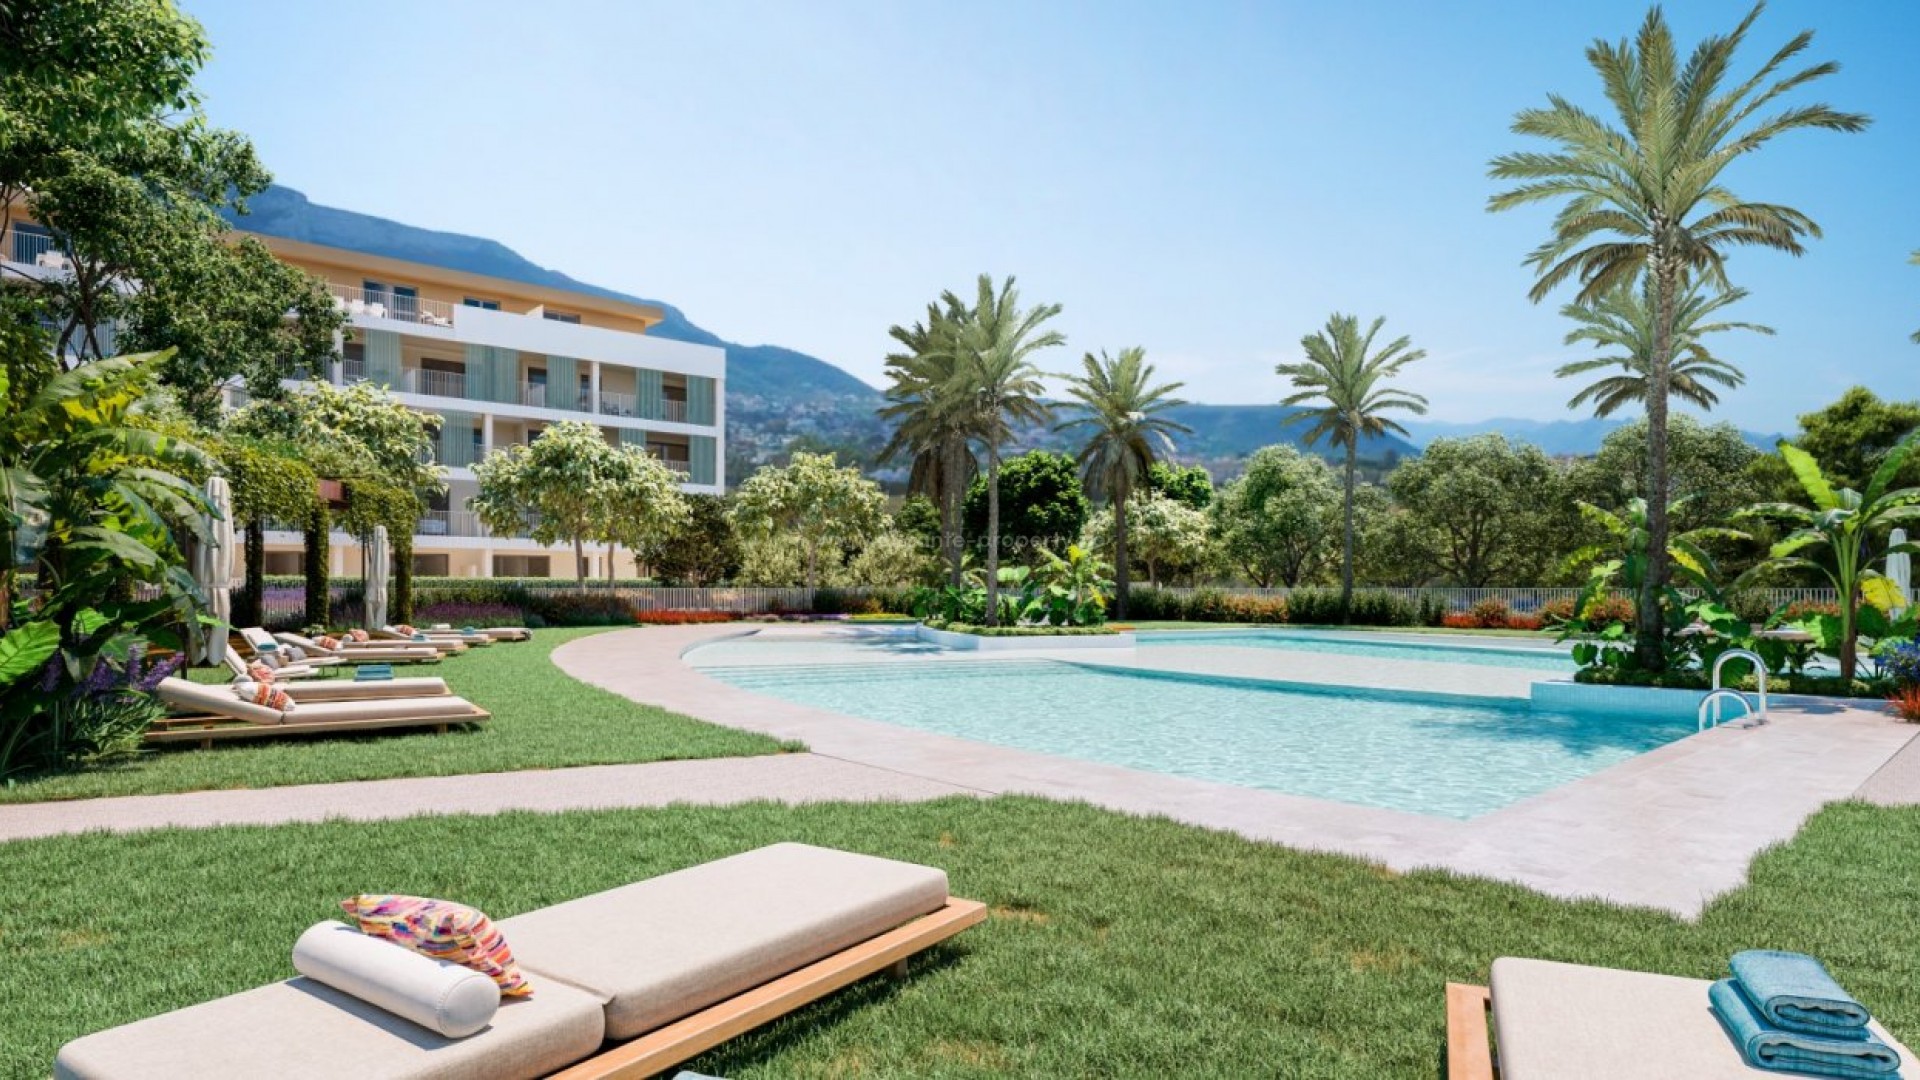 Exclusive residential complex with apartments in Denia near the sea, 2/3/4 bedrooms, 2 bathrooms, all with nice terraces, pool for adults and children, gym